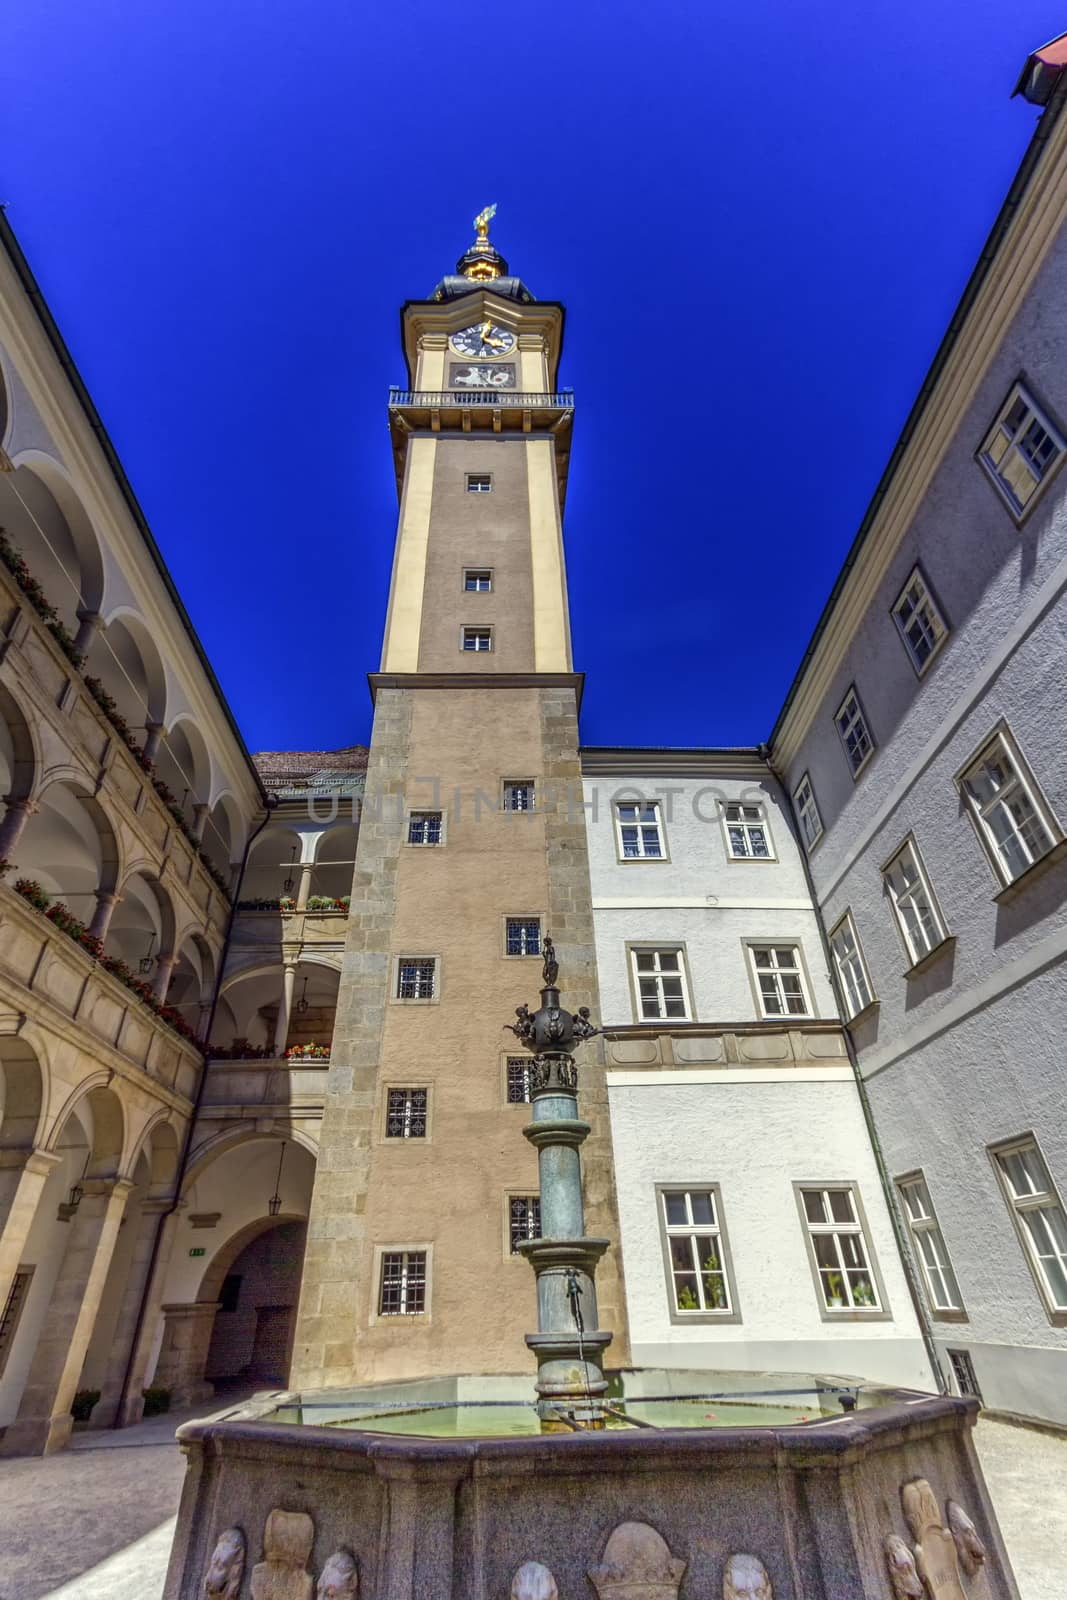 Inner court of Landhaus with its Planet Fountain and tower in Linz, Austria